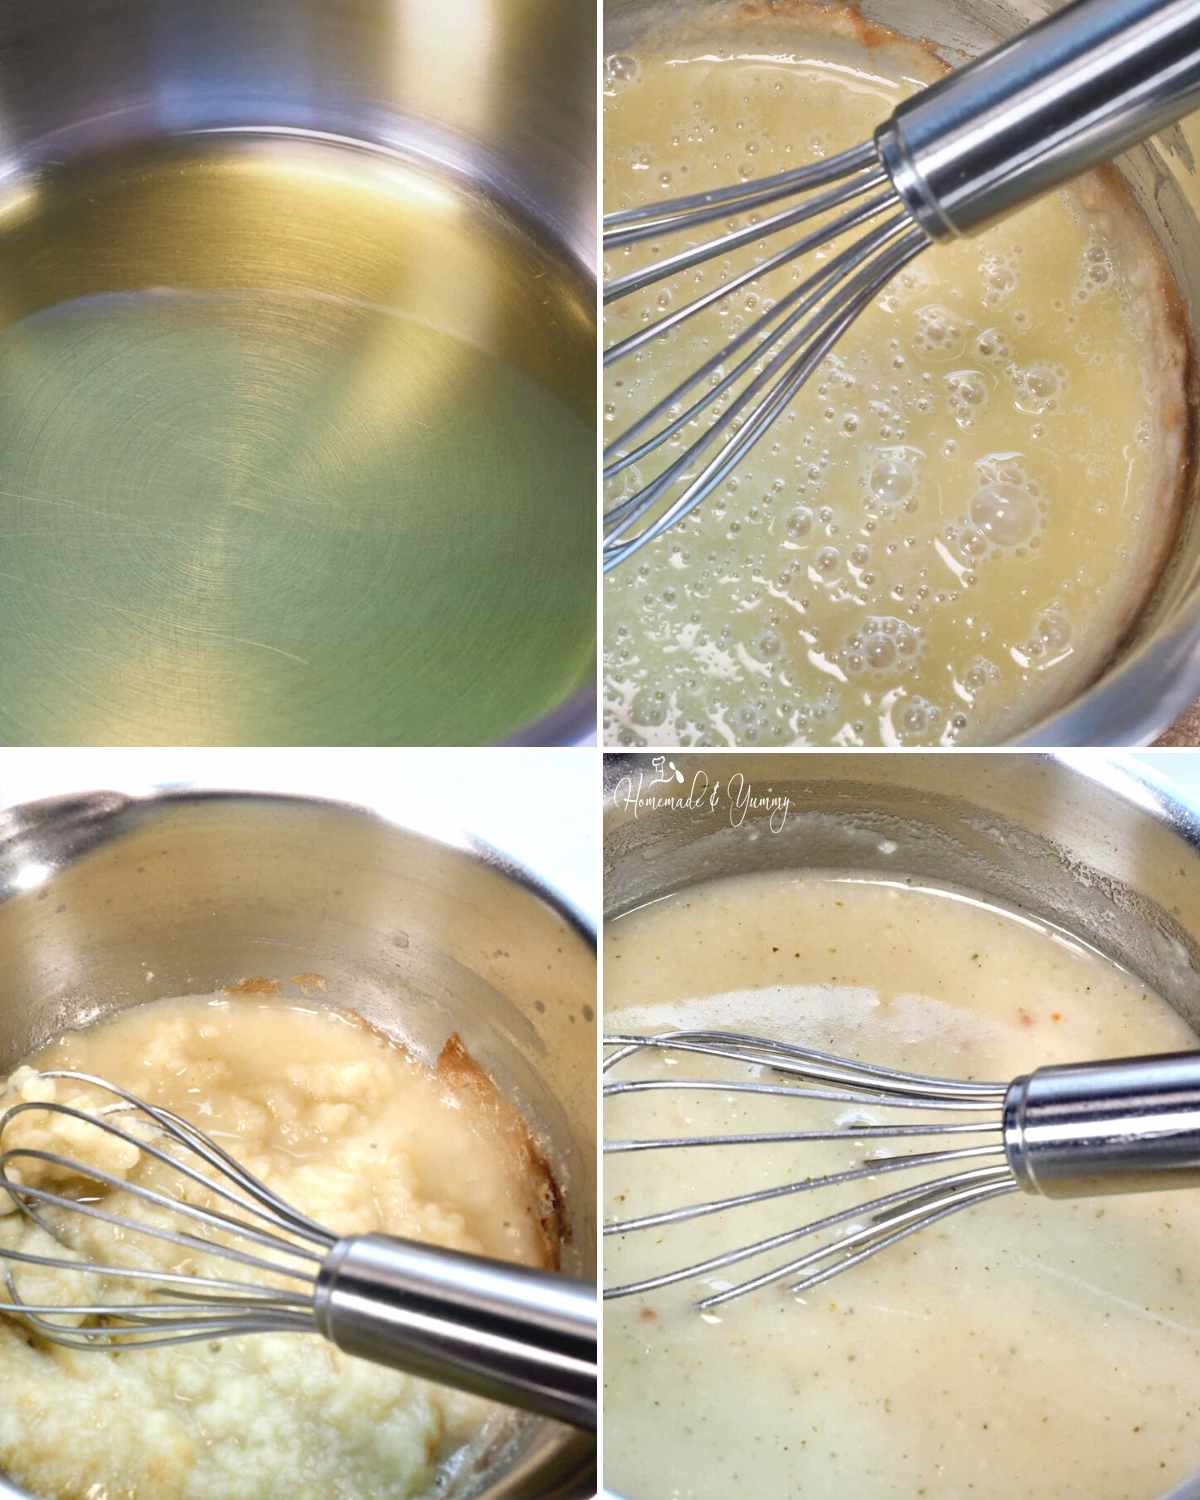 The steps involved to making homemade gravy from scratch.